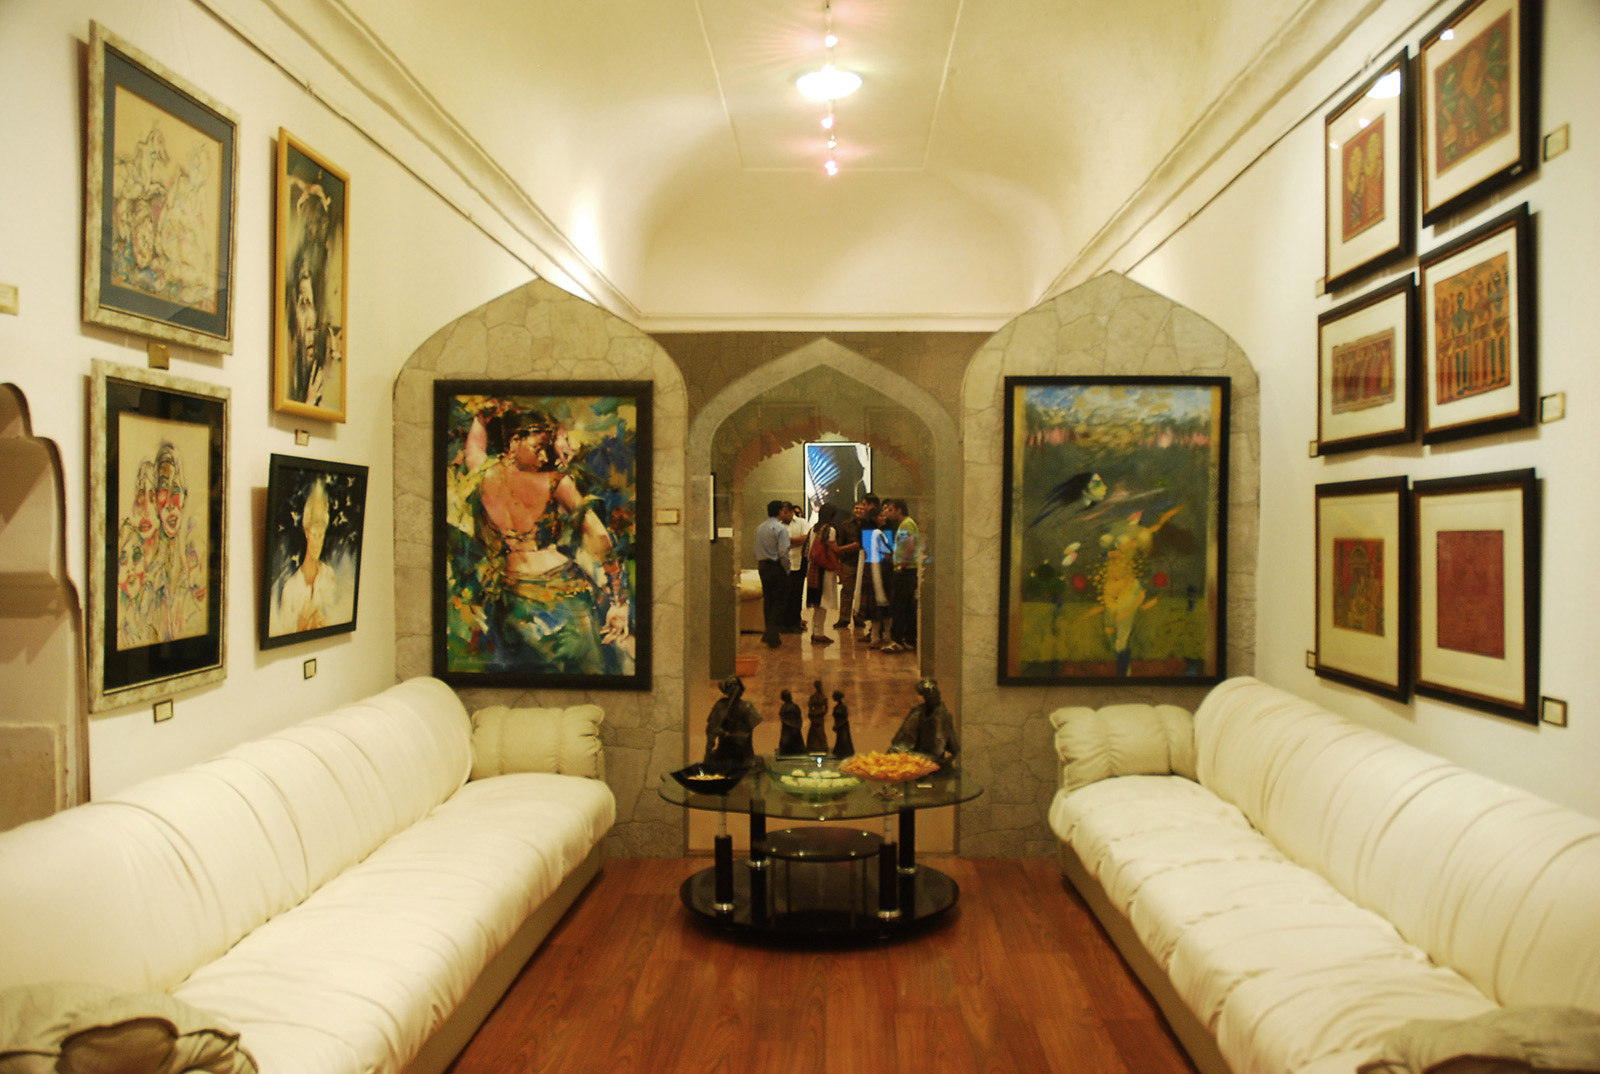 Interior view of the museum